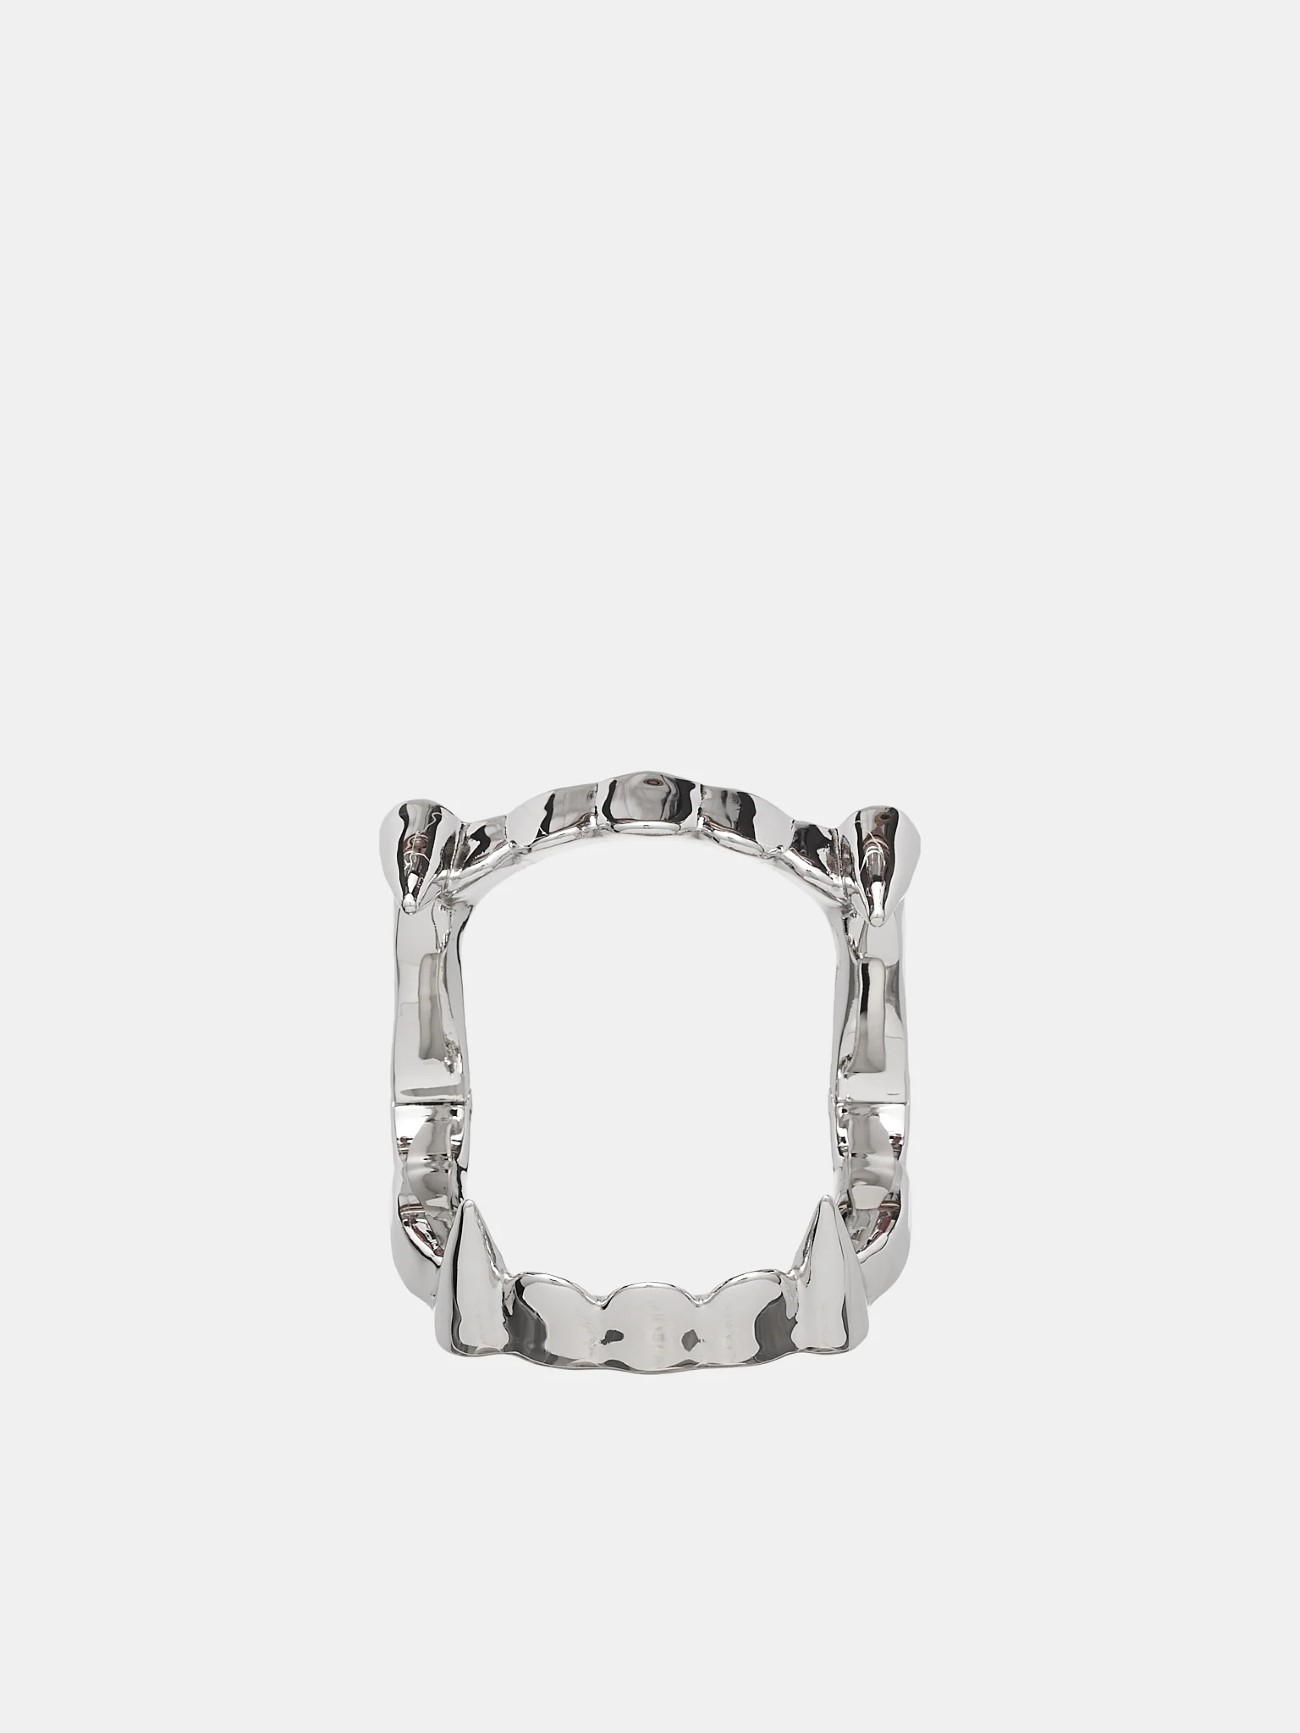 Raf Simons unveils Vampire Fang jewelry collection for Spring Summer 2023